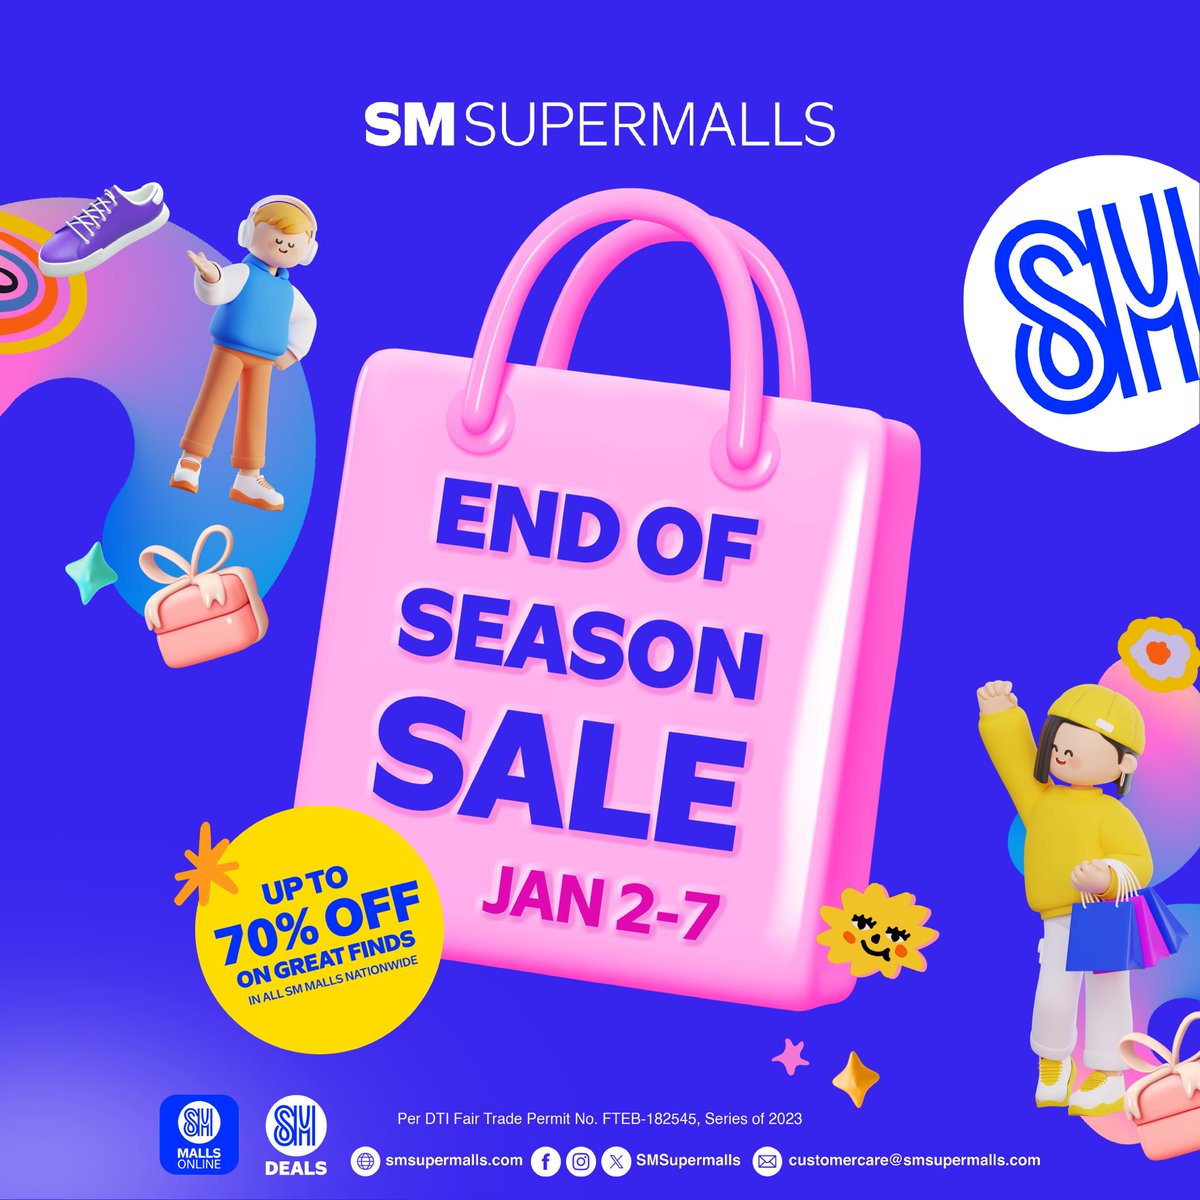 Just when you think the celebrations are over, #EndOfSeasonSaleAtSM is here once again!

Get ready to enjoy up to 70% off on selected items from January 2-7! Start the year right and #ExperienceTogetherAtSM a sale that will definitely make your year AWESOME! 💙🫂